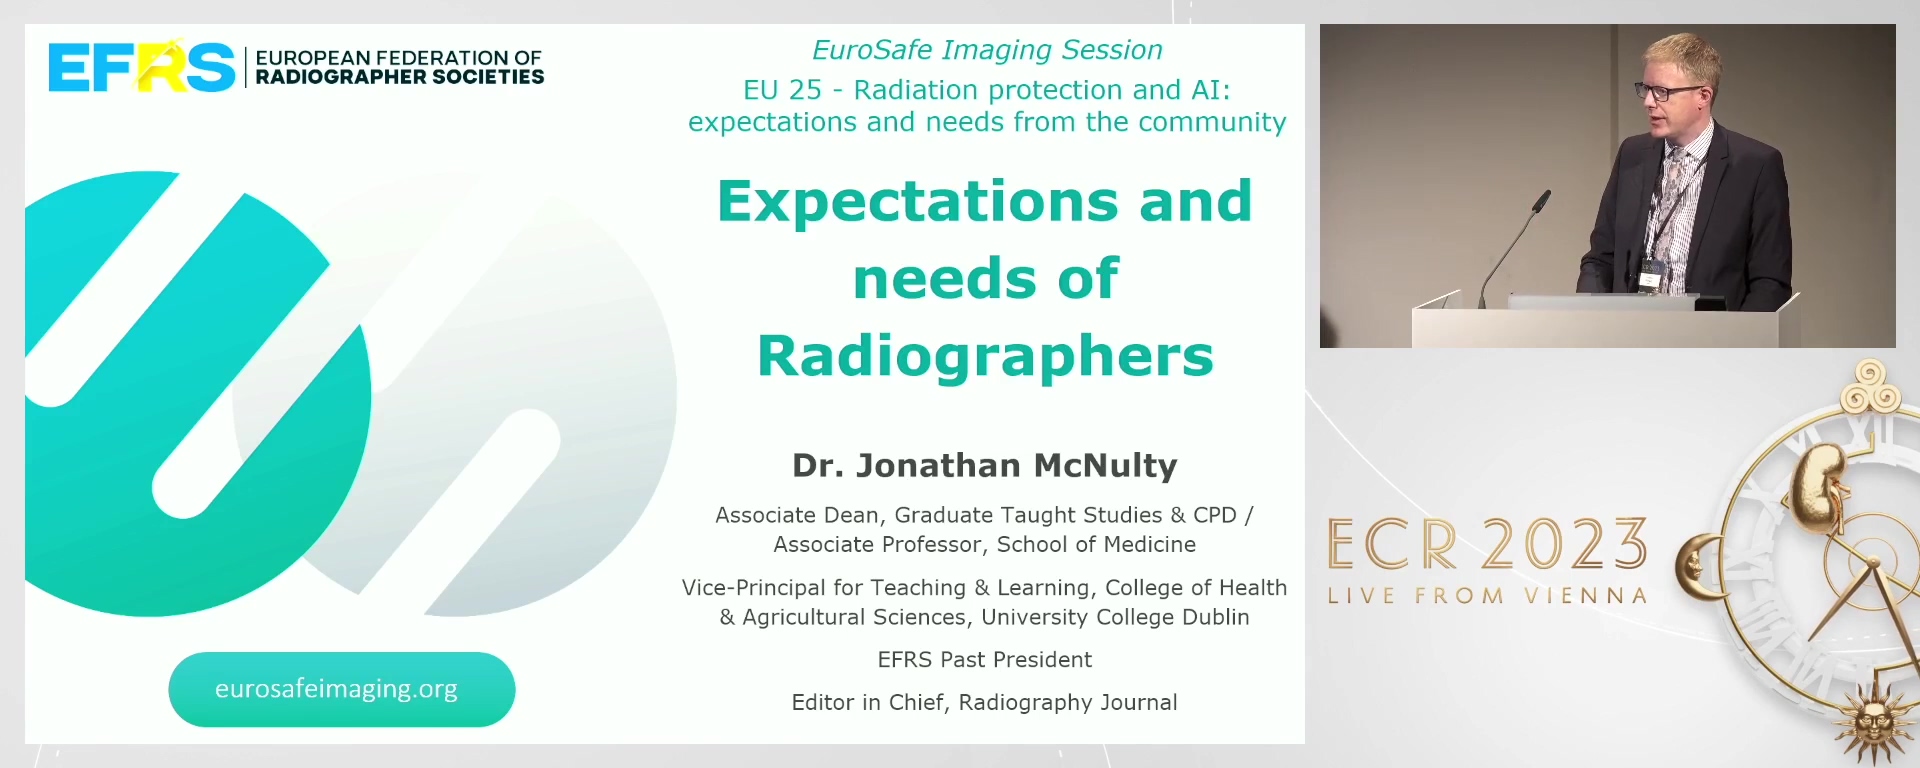 Expectations and needs of radiographers - Jonathan McNulty, Dublin / IE